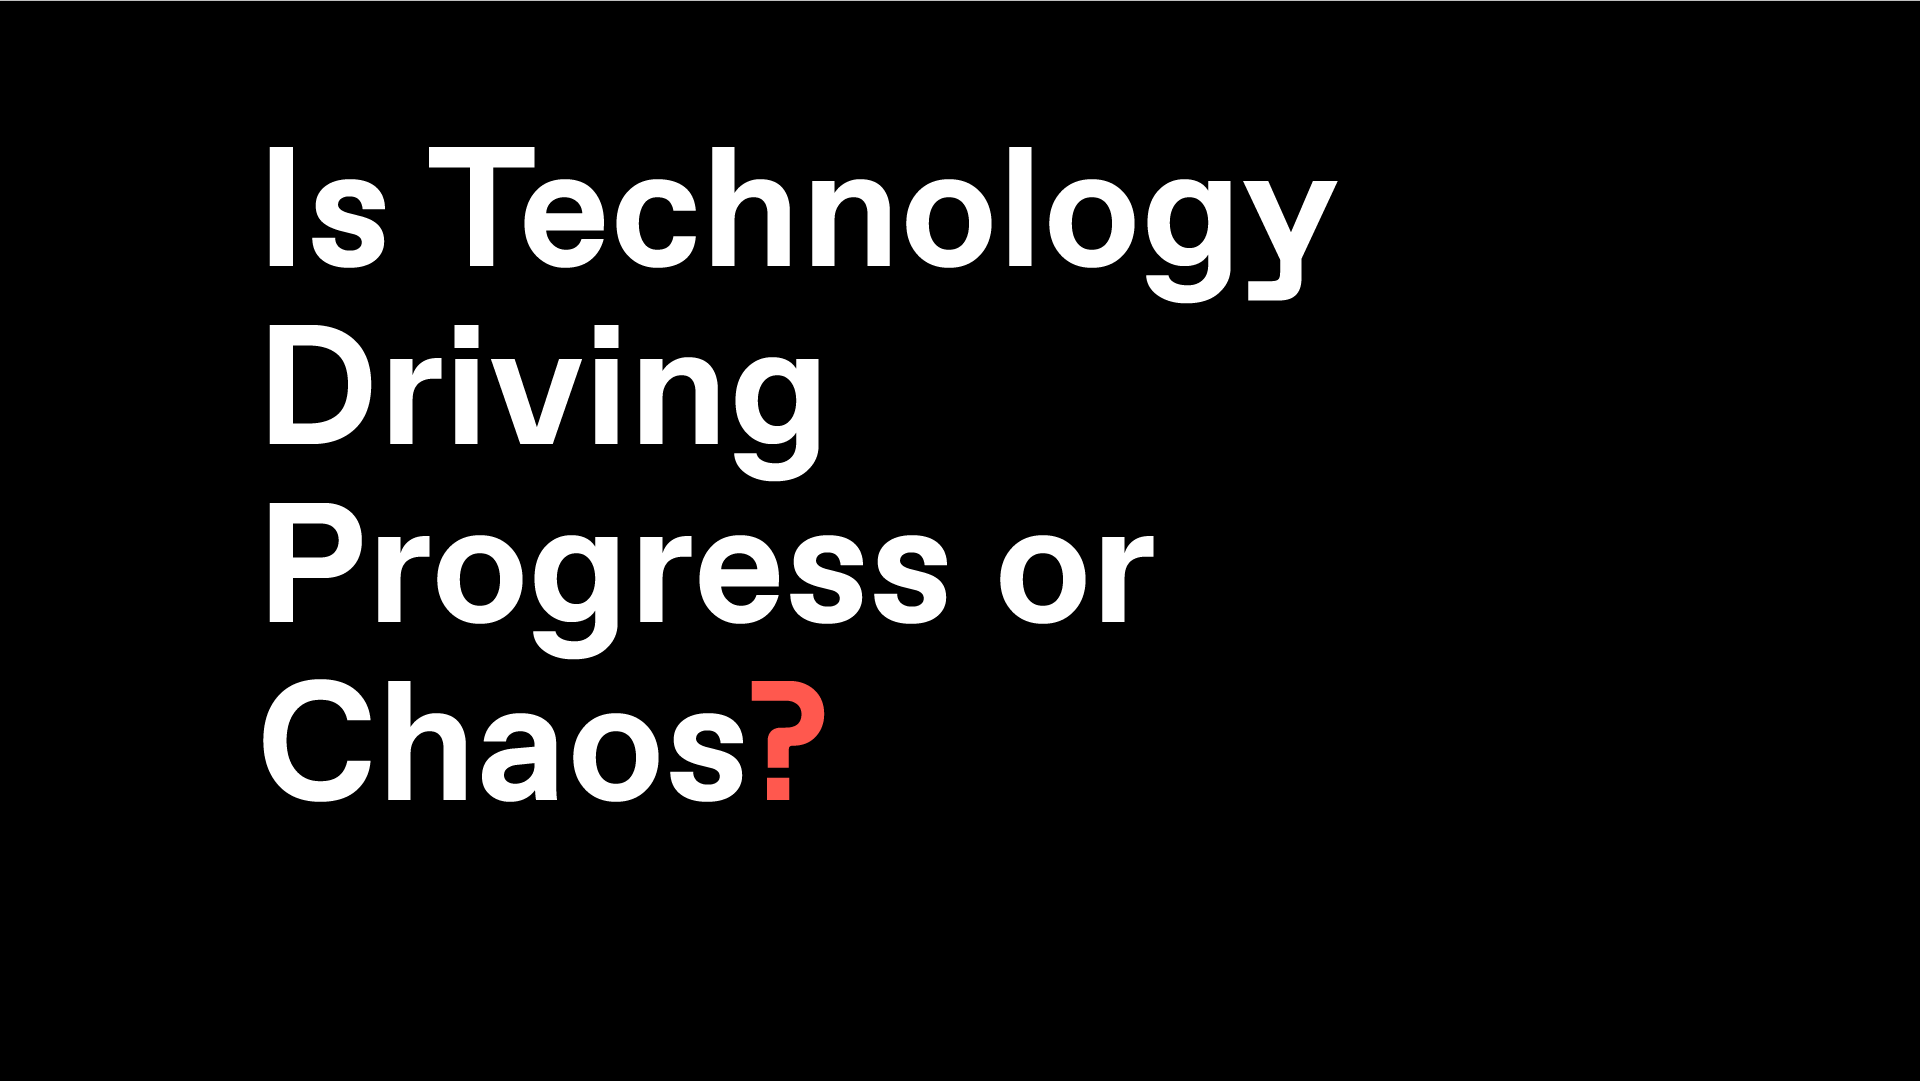 Unfinished Live Episode 3 Asks “Is Technology Driving Progress or Chaos?”